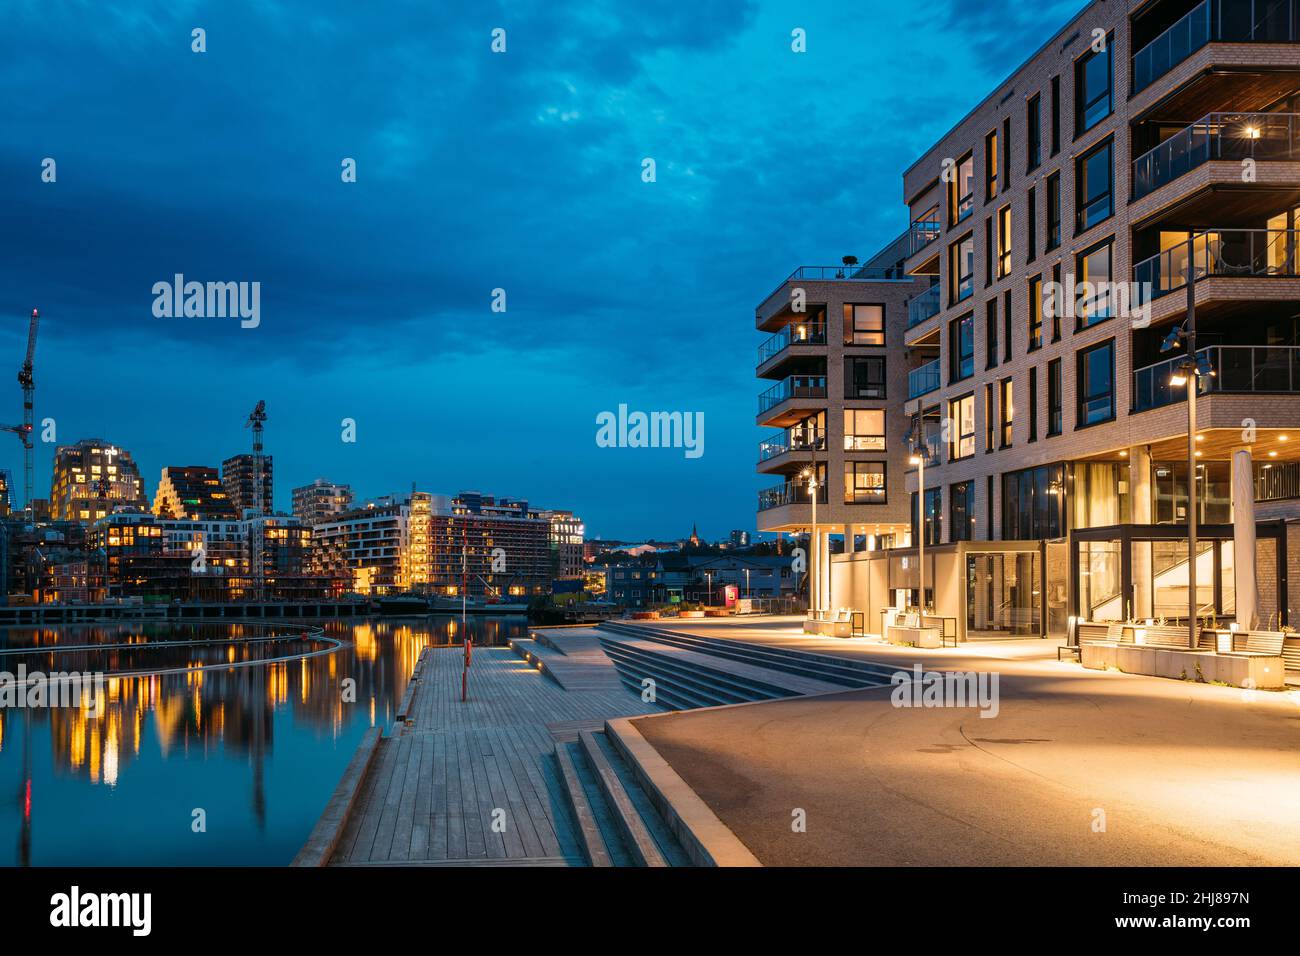 Oslo, Norway - June 25, 2019: Night View Embankment And Residential Multi-storey House On Sorengkaia Street In Gamle Oslo District. Residential Area Stock Photo